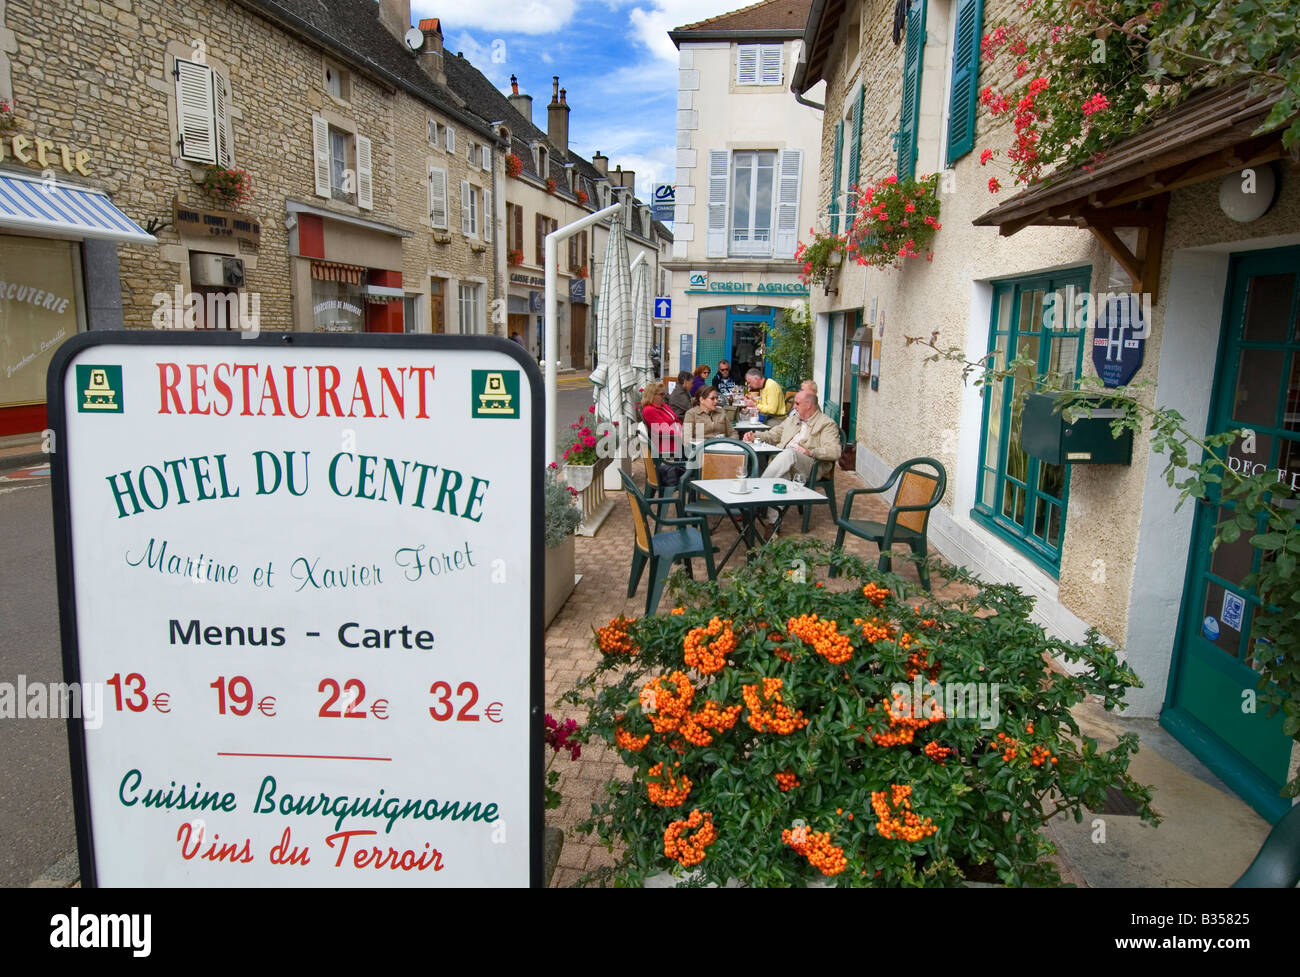 Typical value fixed price menu board, with visitors enjoying an alfresco drink at Hotel du Centre Meursault Cote d'Or France Stock Photo